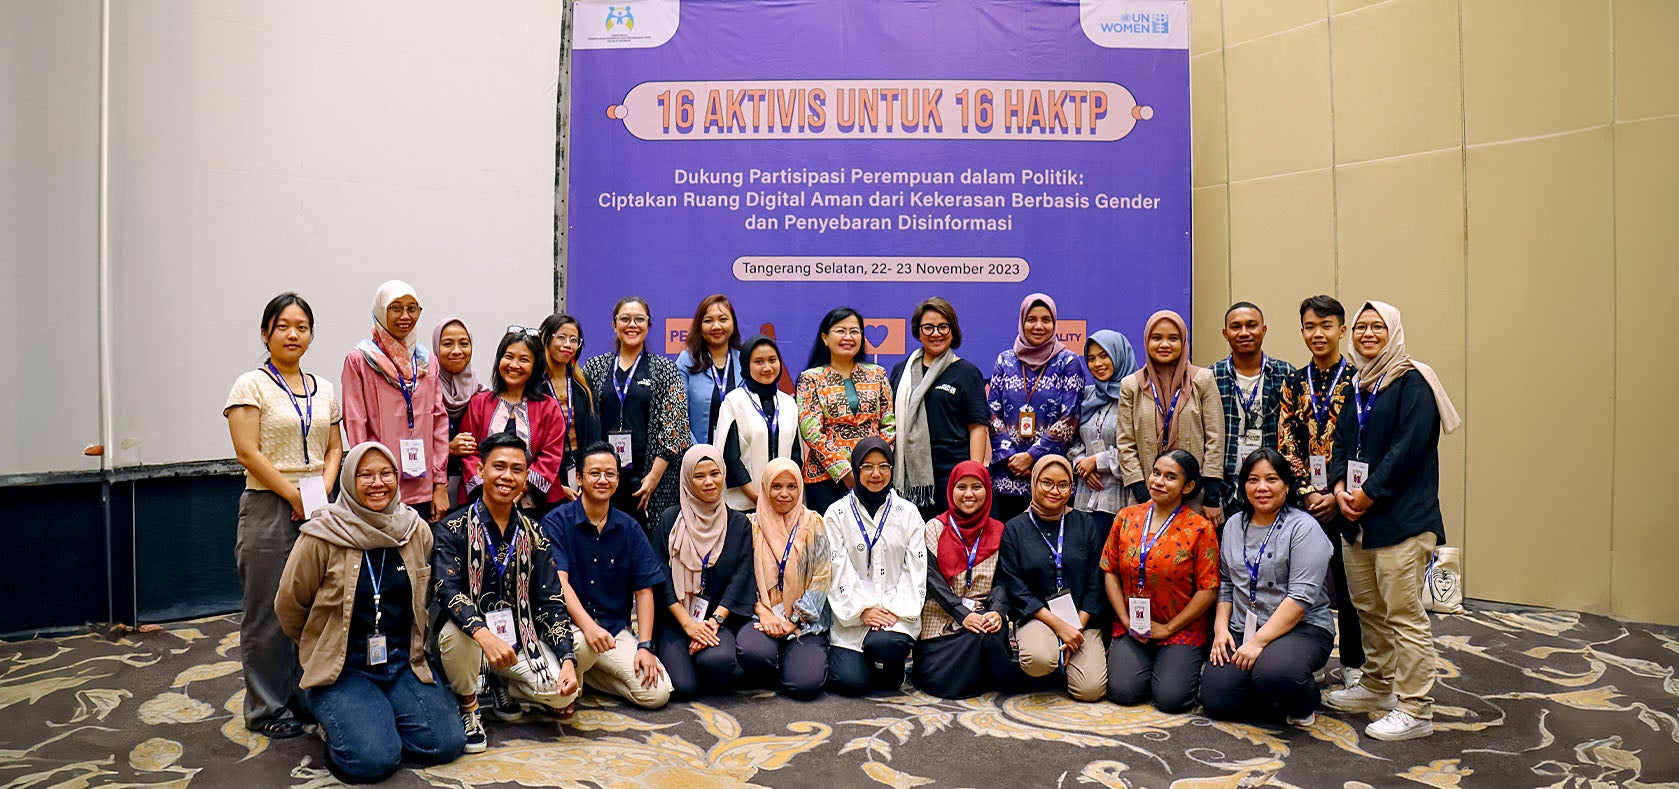 16 activists from all over Indonesia gathered in Jakarta to participate in the workshop on combating online gender-based violence, misinformation, disinformation, and hoaxes. Photo: UN Women/Bintang Aulia